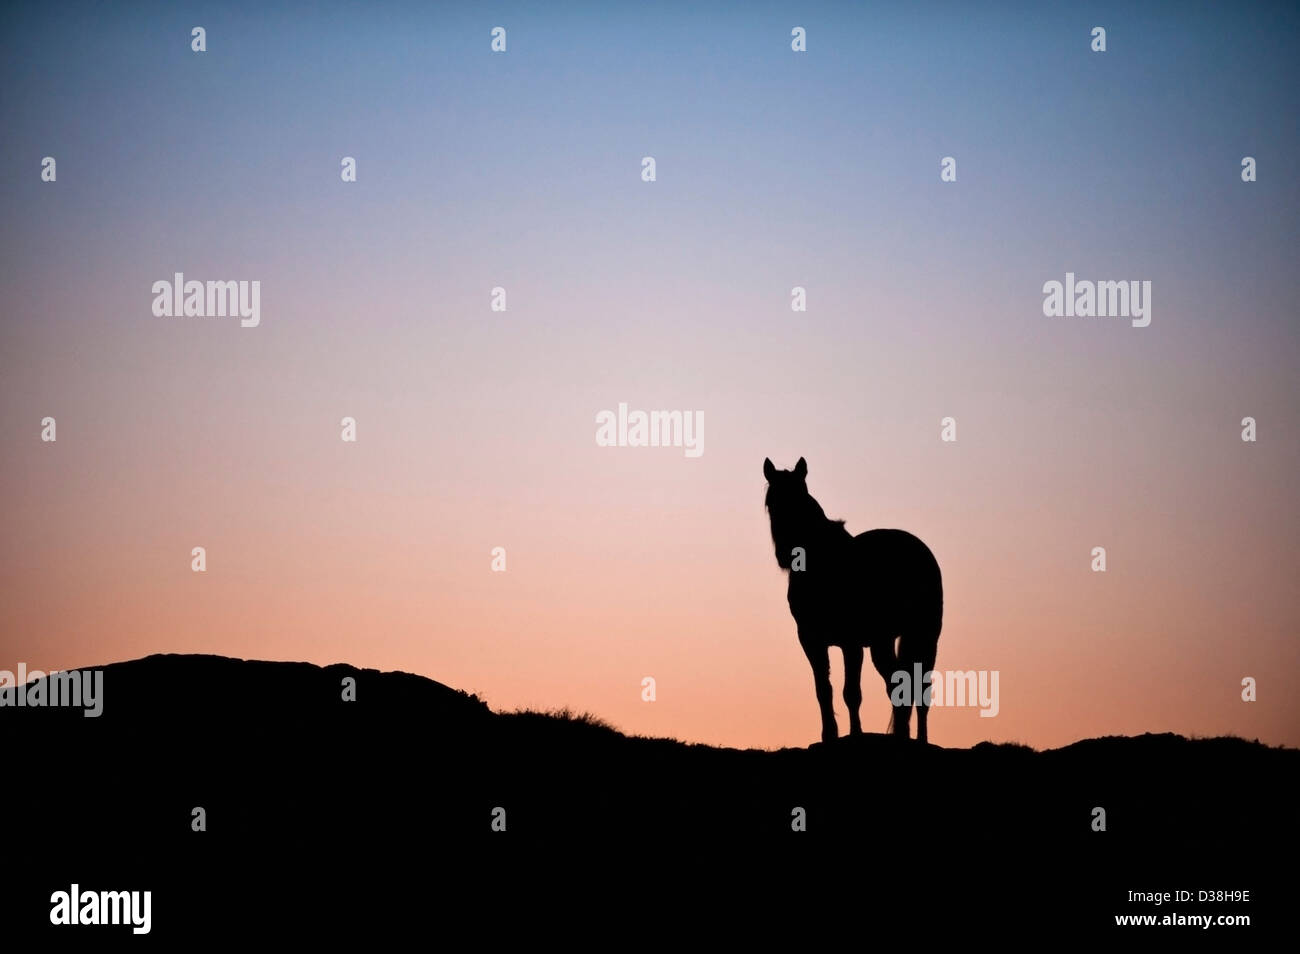 Silhouette of horse on hilltop Stock Photo